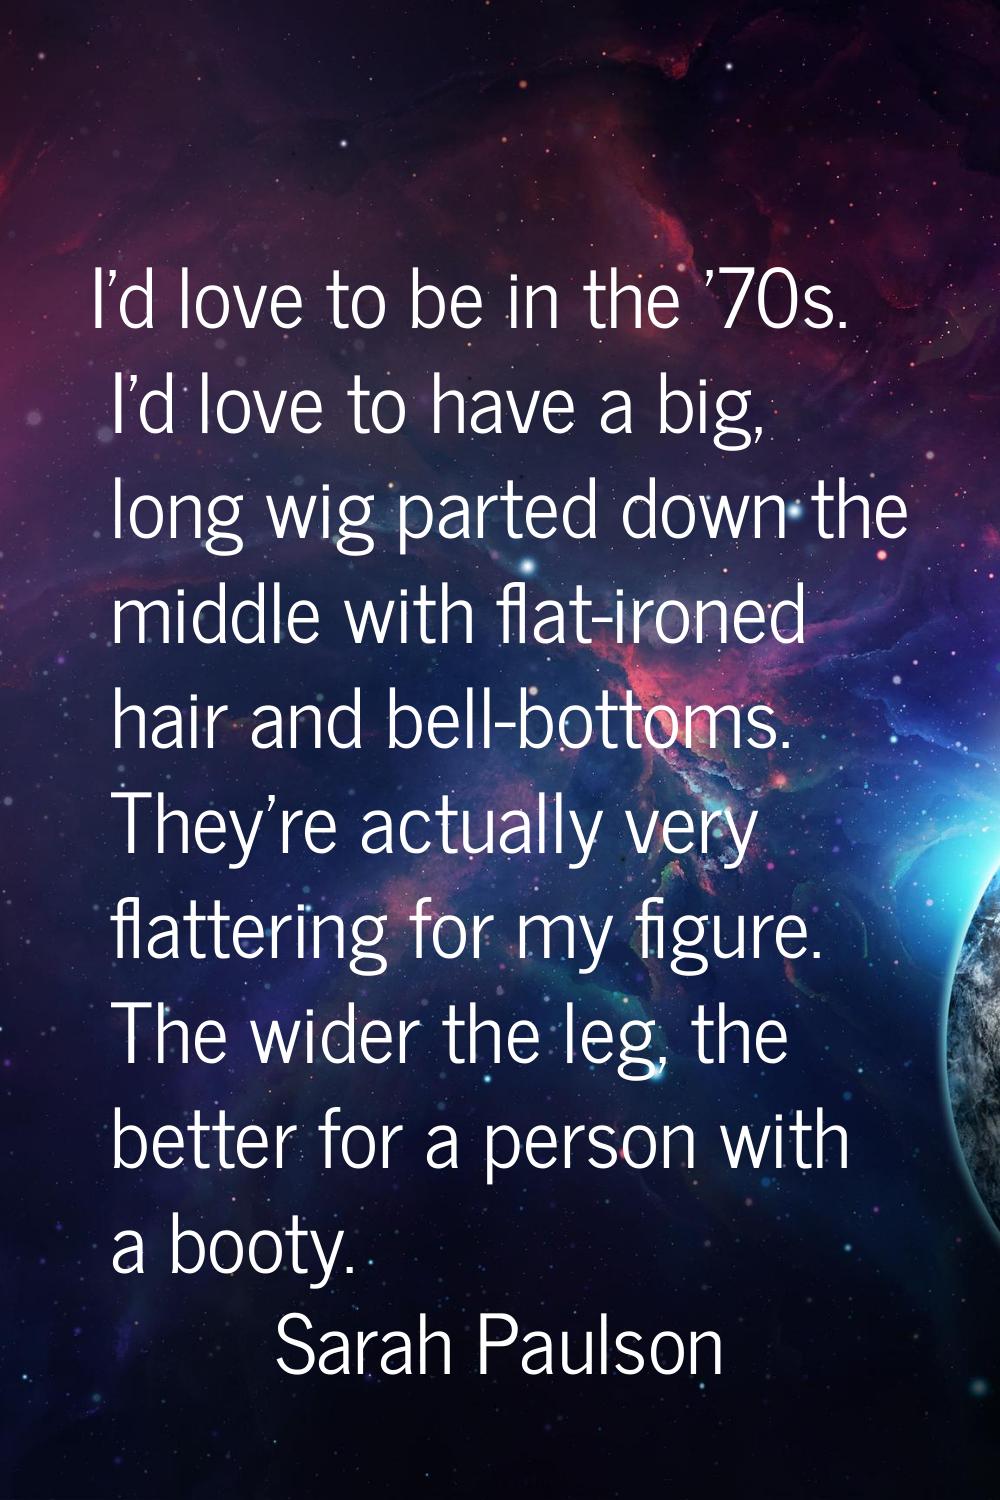 I'd love to be in the '70s. I'd love to have a big, long wig parted down the middle with flat-irone